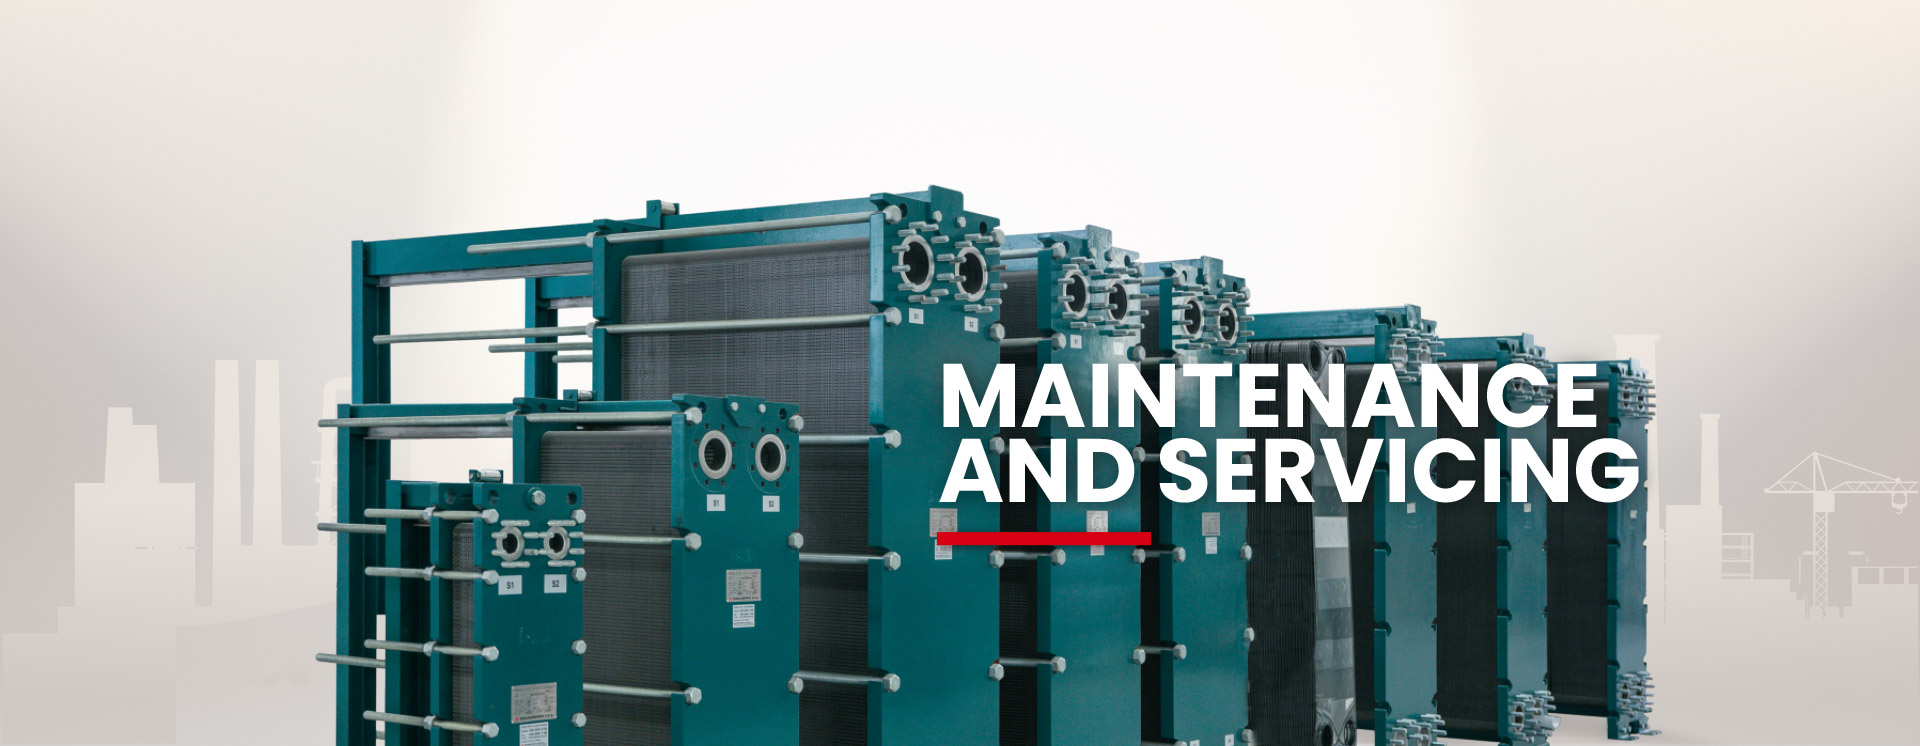 Plate Heat Exchanger Maintenance, Cleaning & Servicing